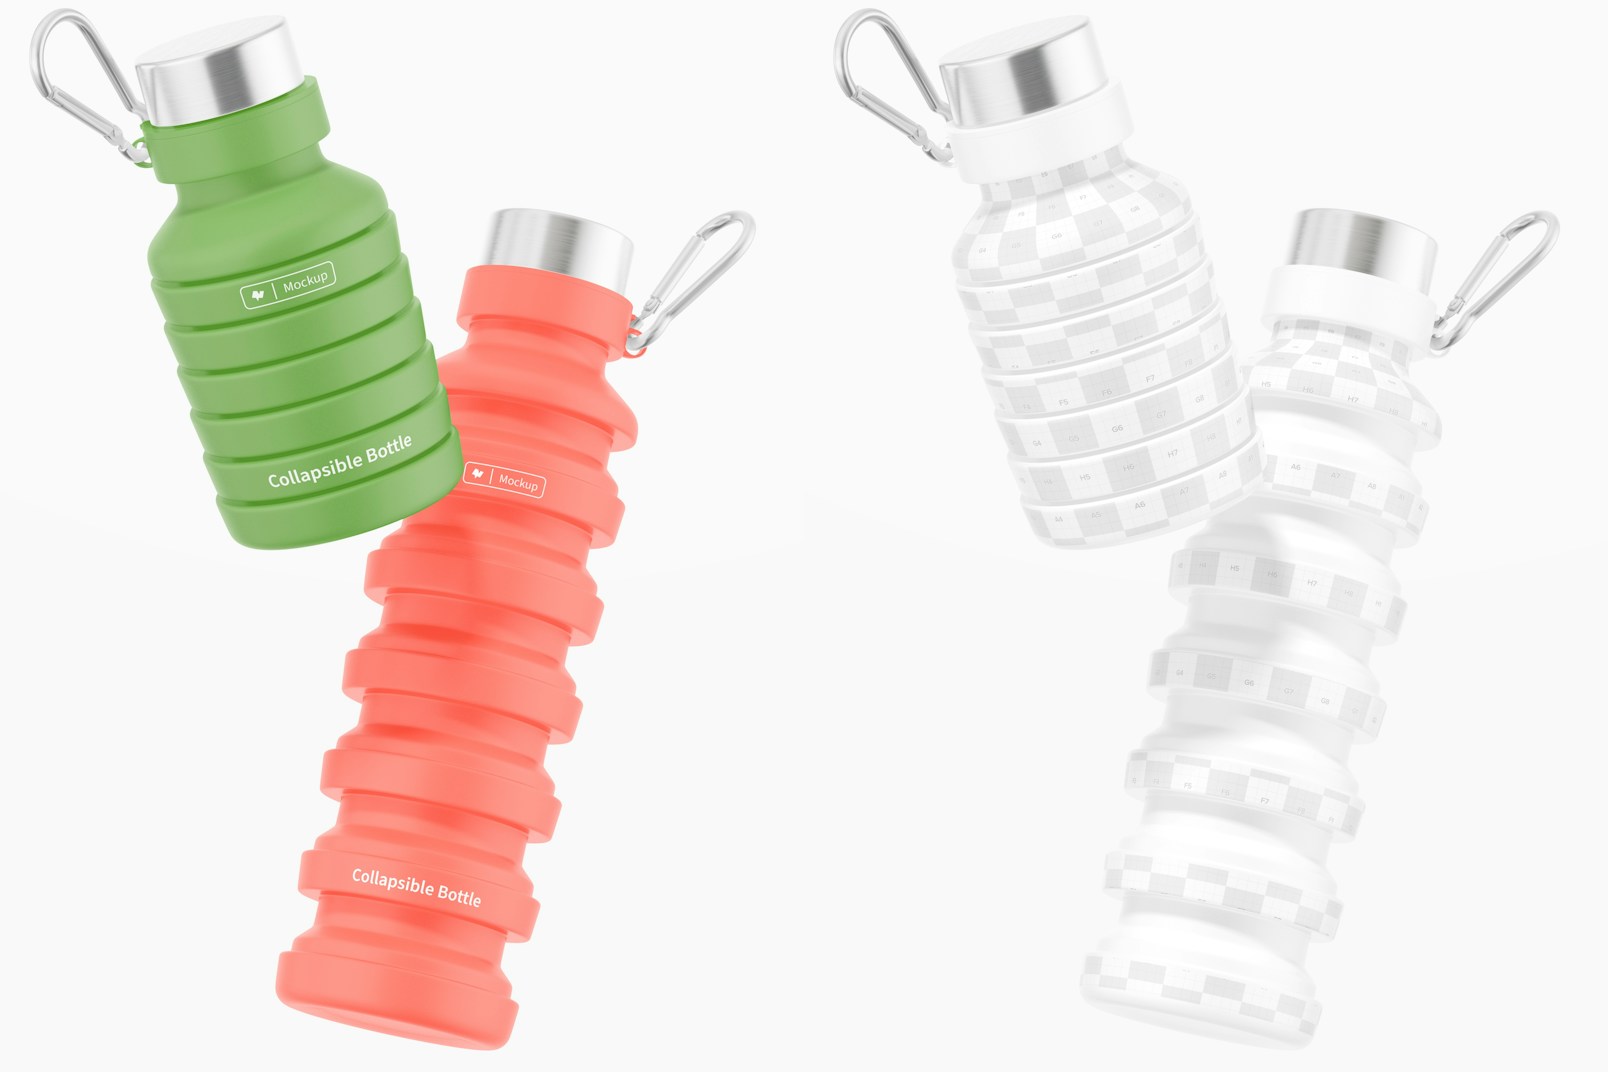 Collapsible Water Bottles Mockup, Floating